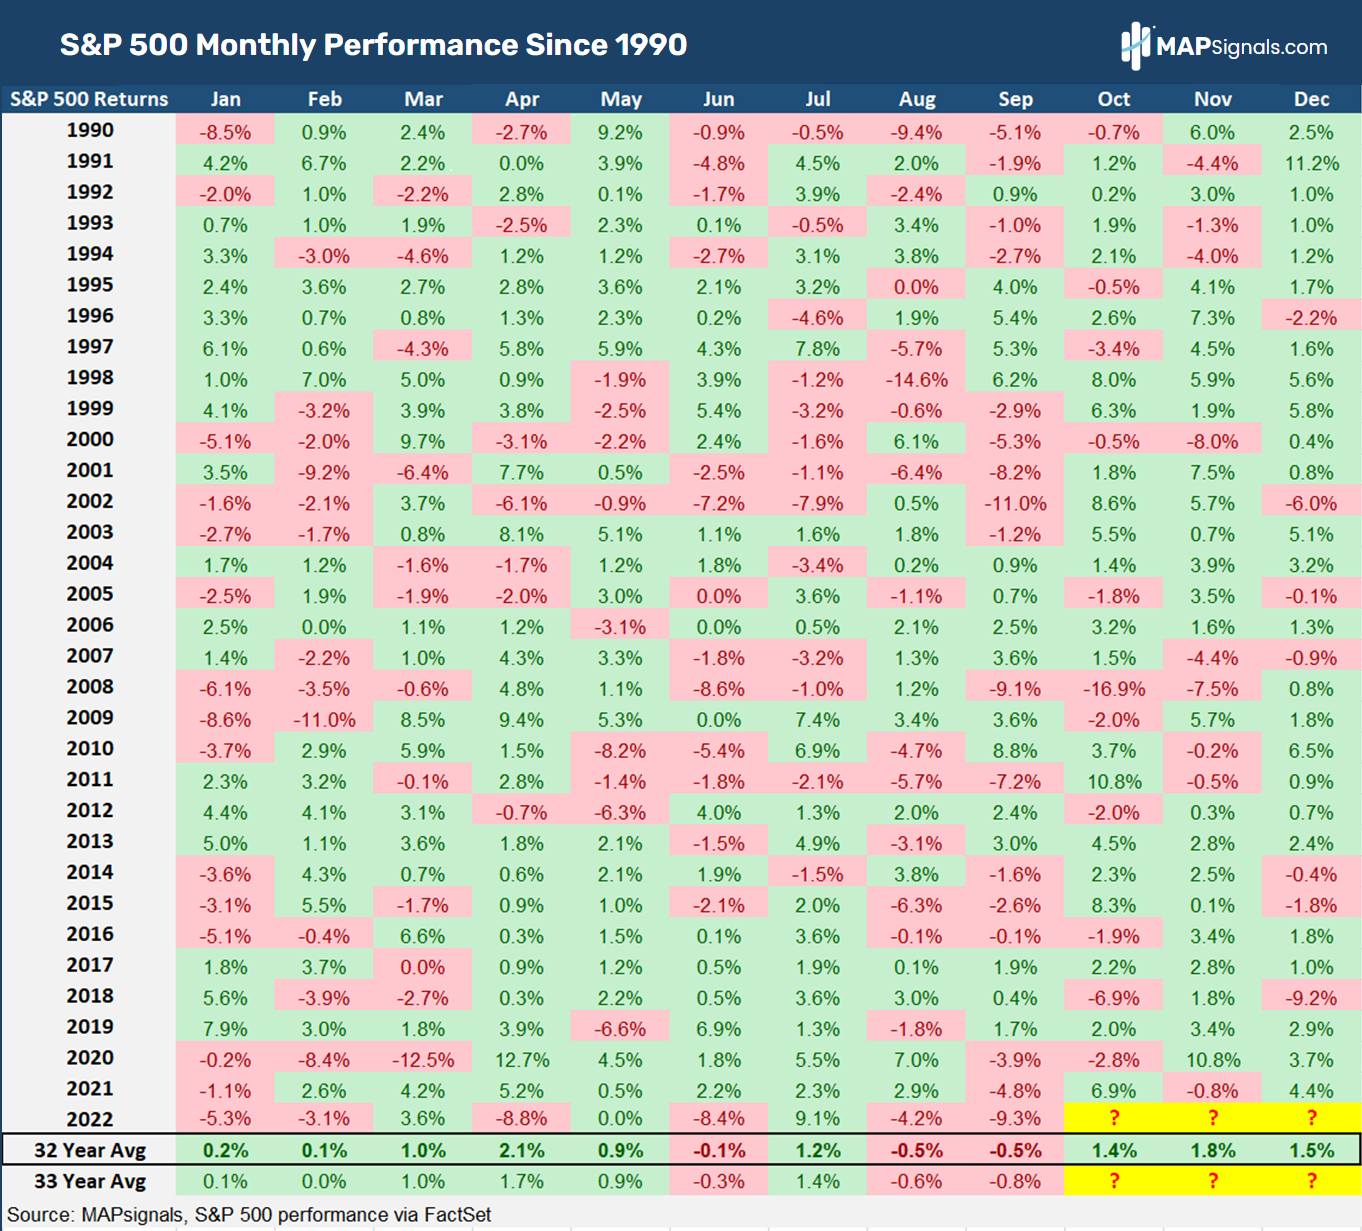 S&P 500 monthly performance since 1990 | MAPsignals